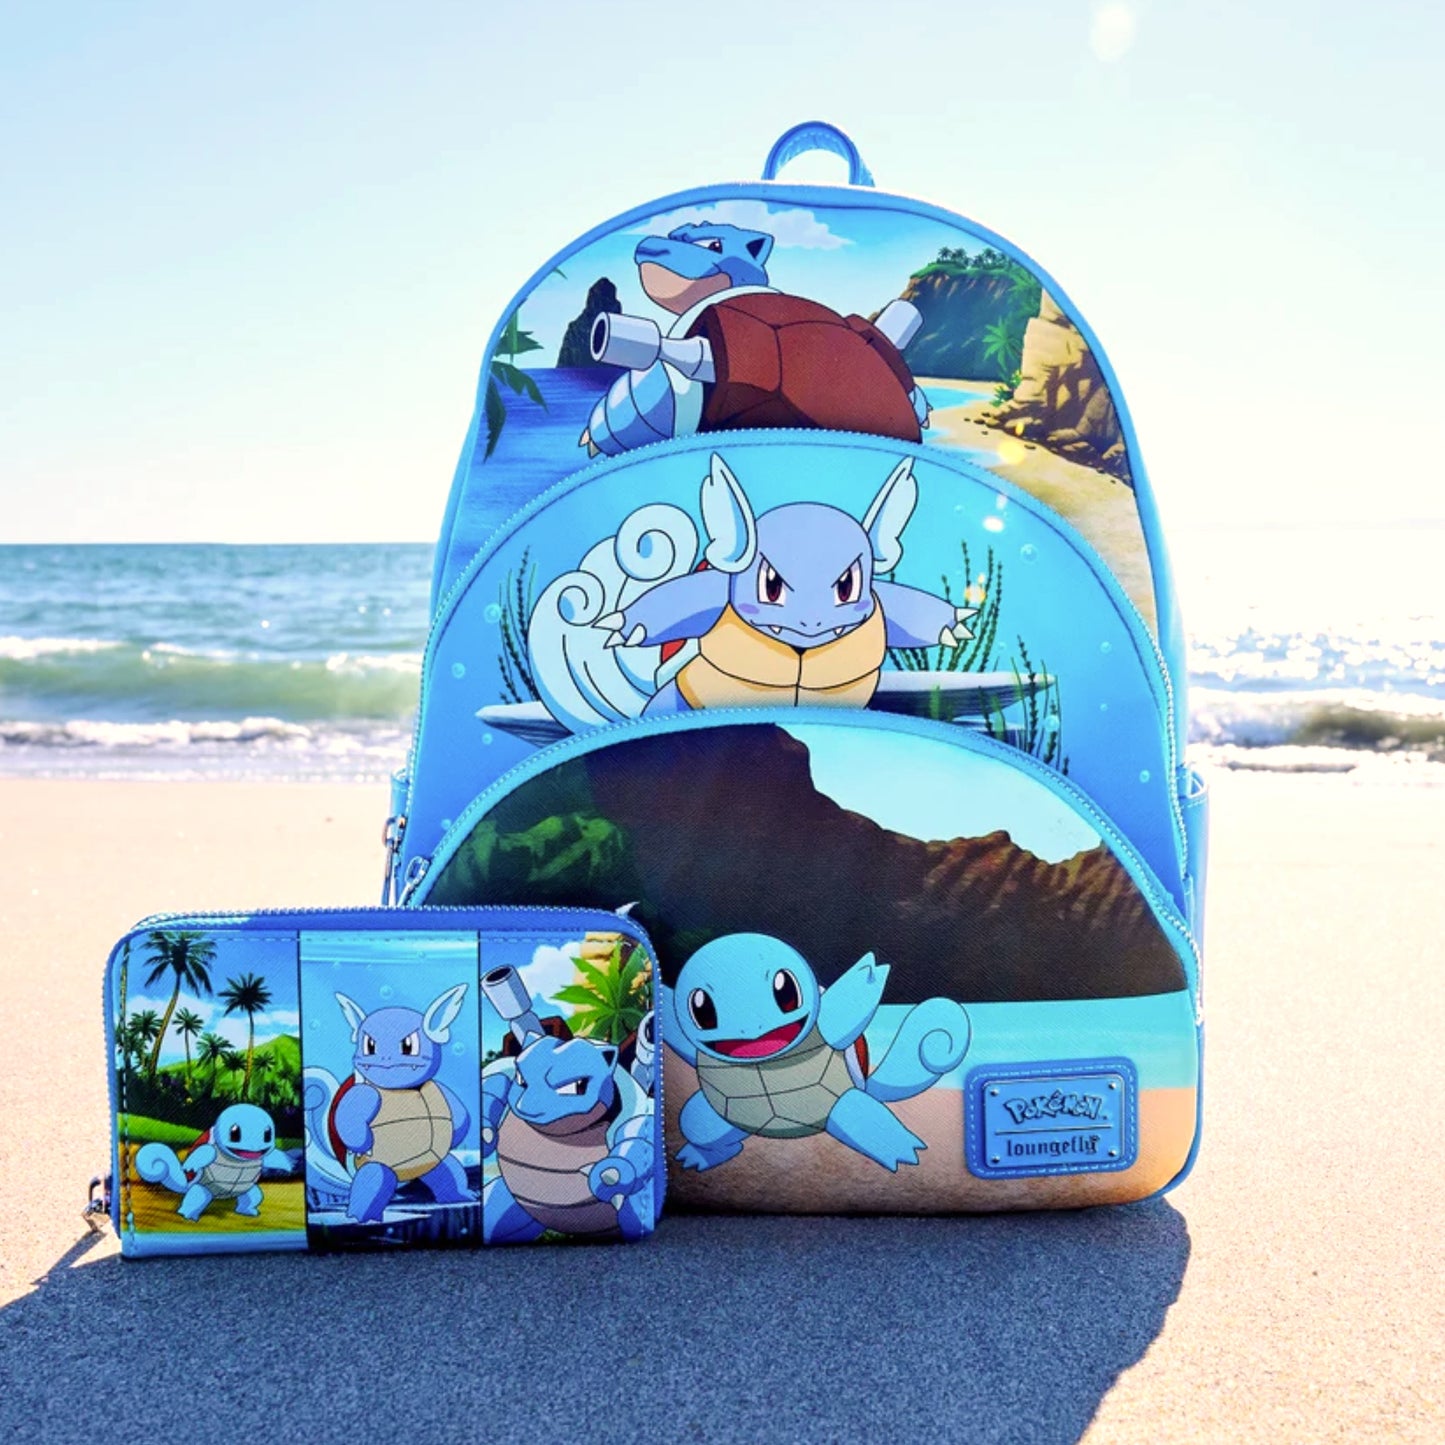 Squirtle Evolution (Pokemon) Zip-Around Wallet by Loungefly